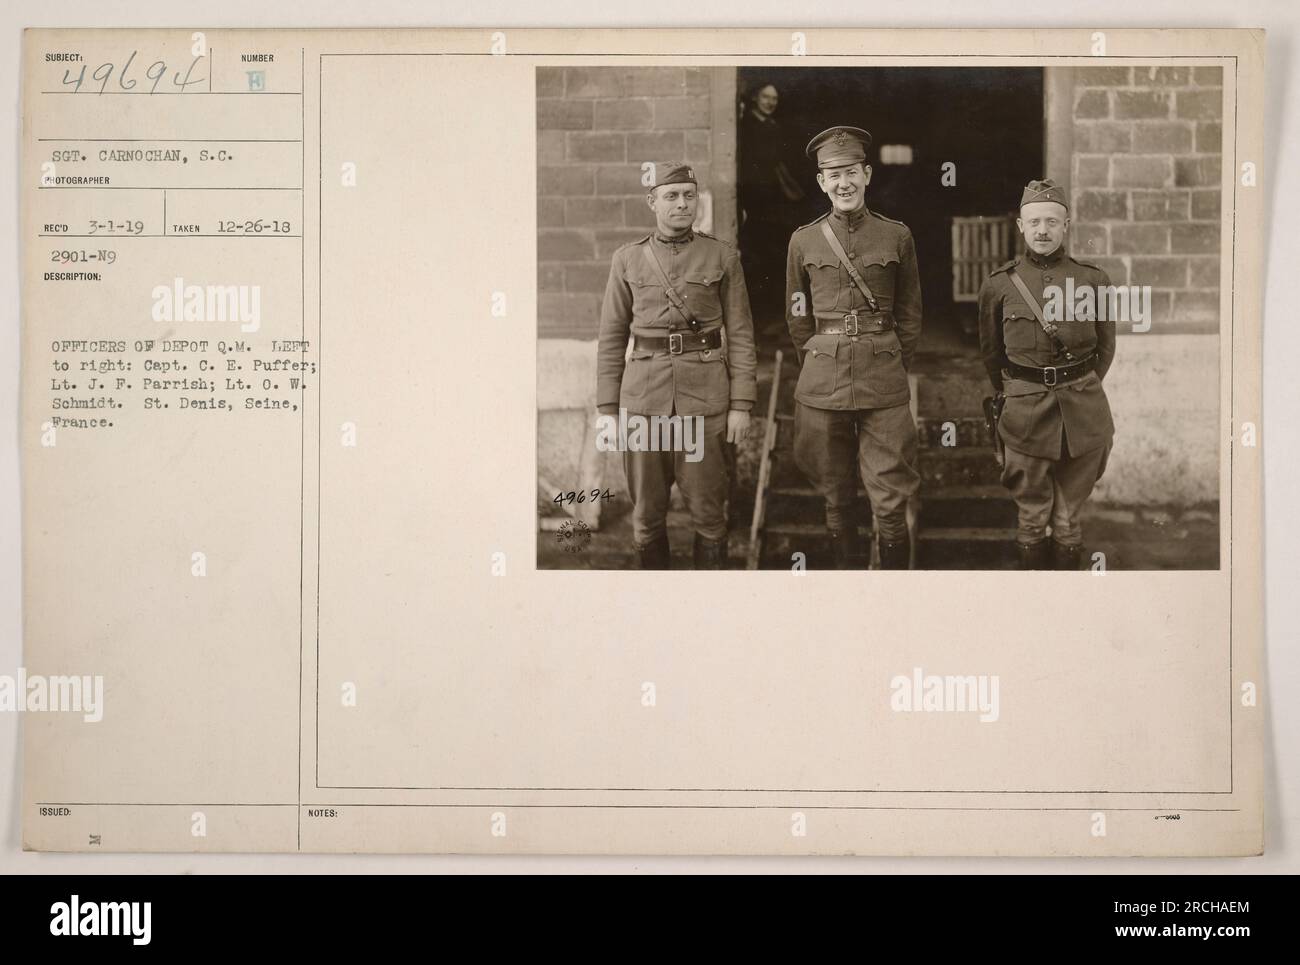 The photograph shows three officers of Depot Q.M. in St. Denis, Seine, France during World War One. The officers from left to right are Capt. C.E. Puffer, Lt. J.F. Parrish, and Lt. O.W. Schmidt. The photo was taken on December 26, 1918, by Sergeant Carno Chan. Stock Photo